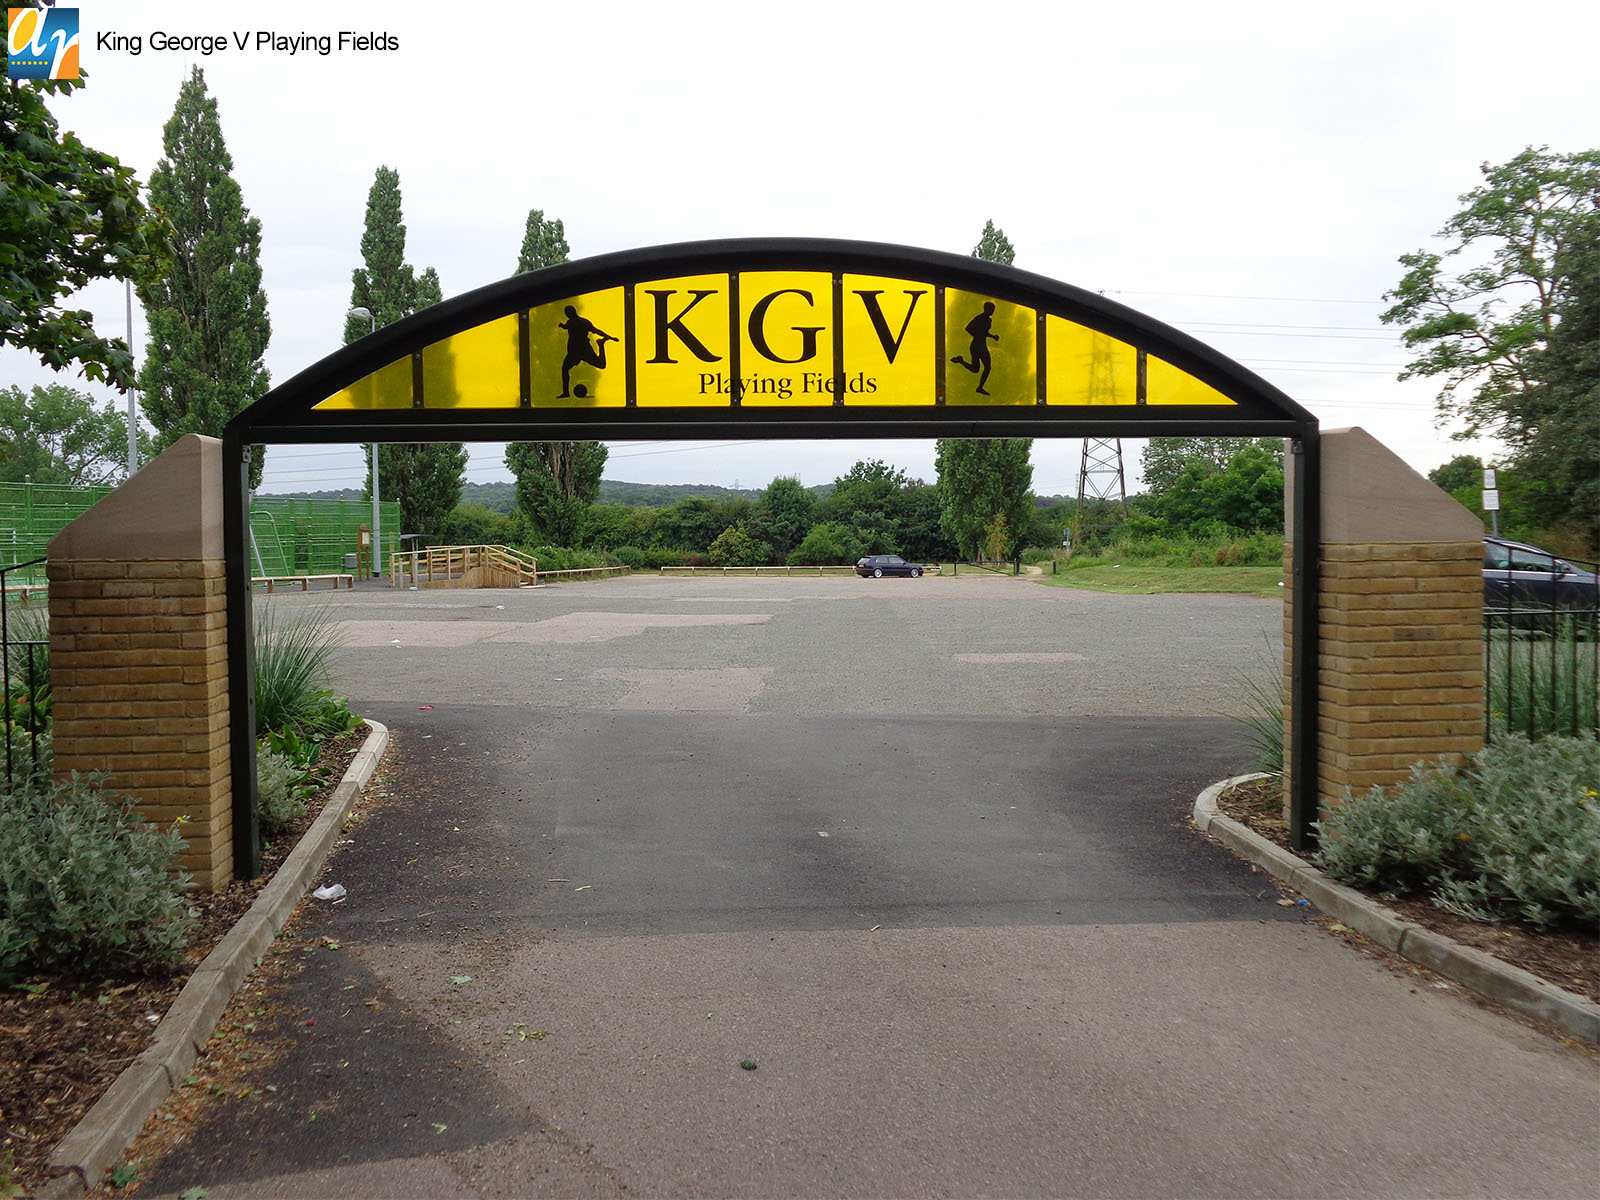 King George V Playing fields metal archway